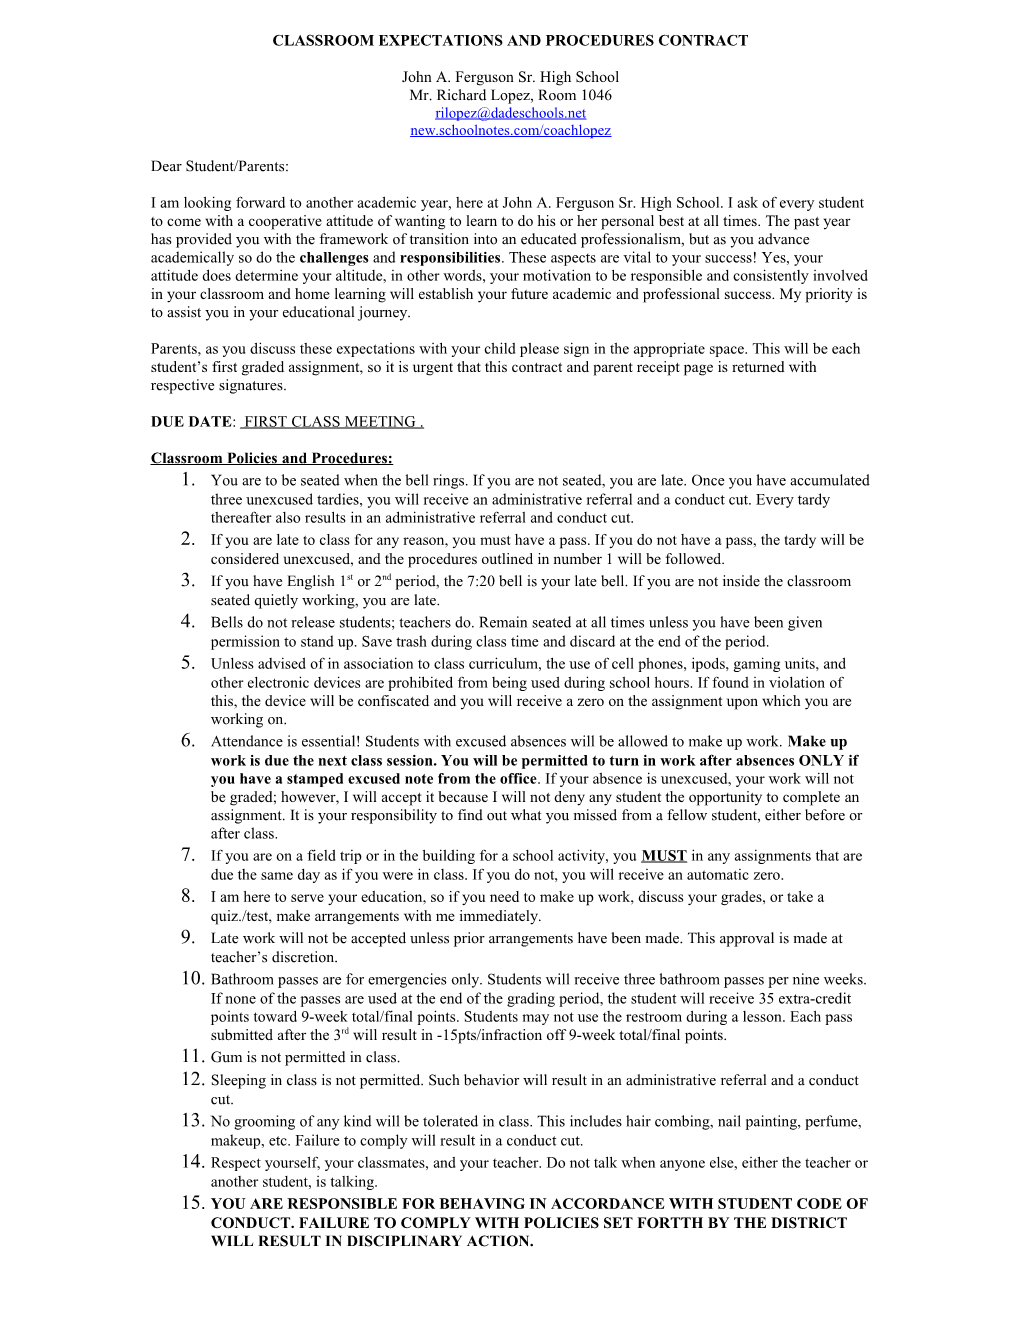 Classroom Expectations and Procedures Contract